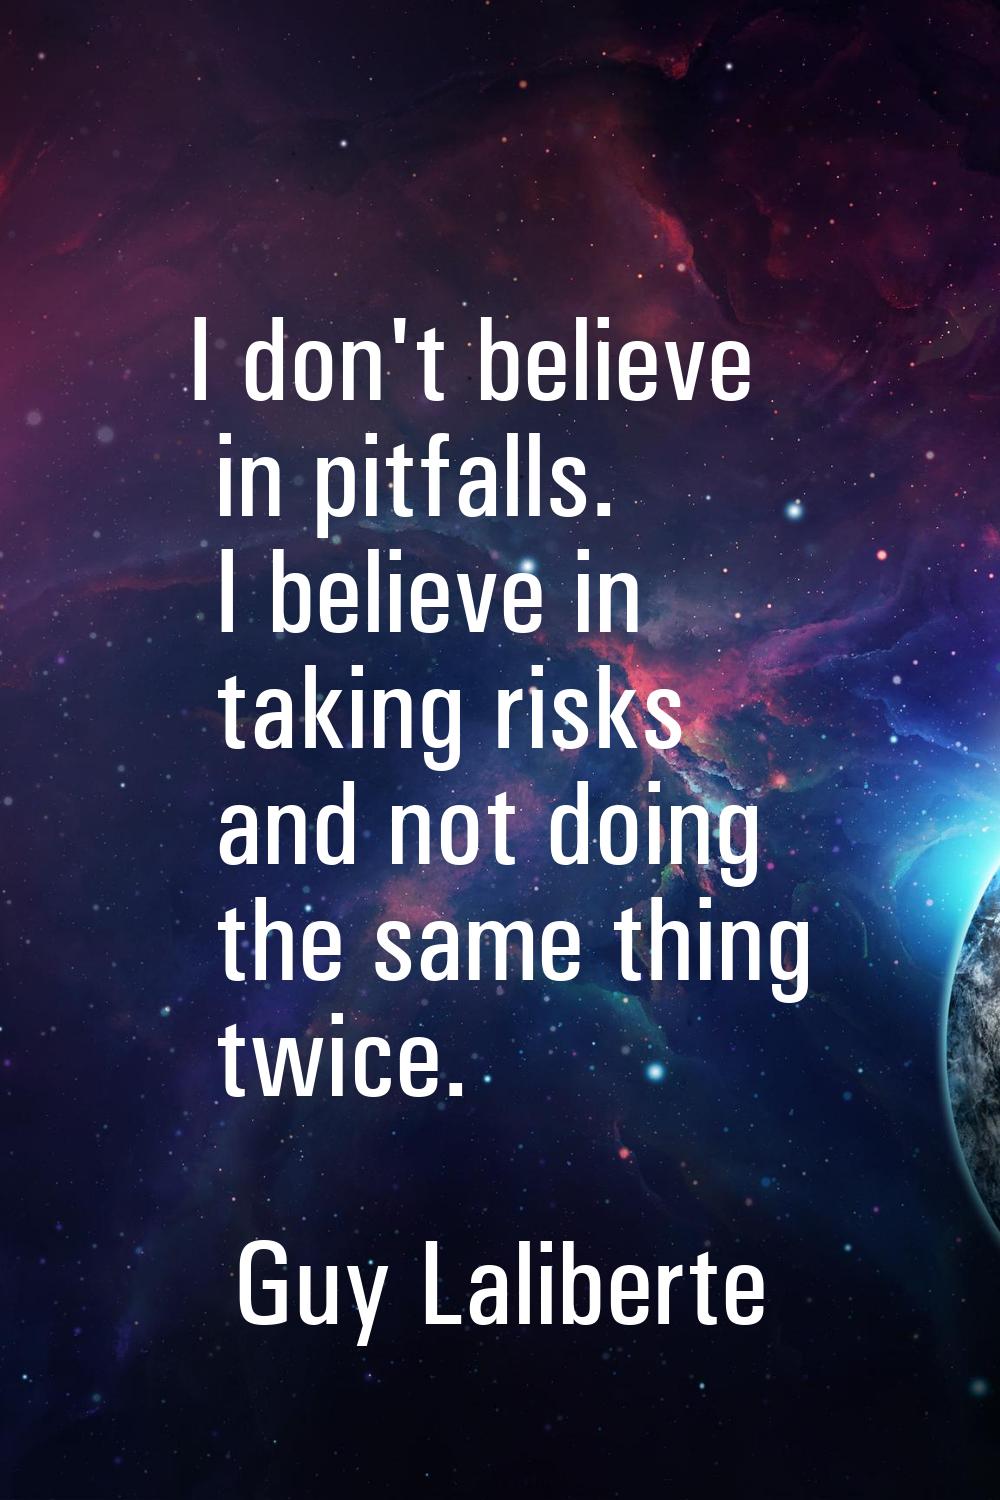 I don't believe in pitfalls. I believe in taking risks and not doing the same thing twice.